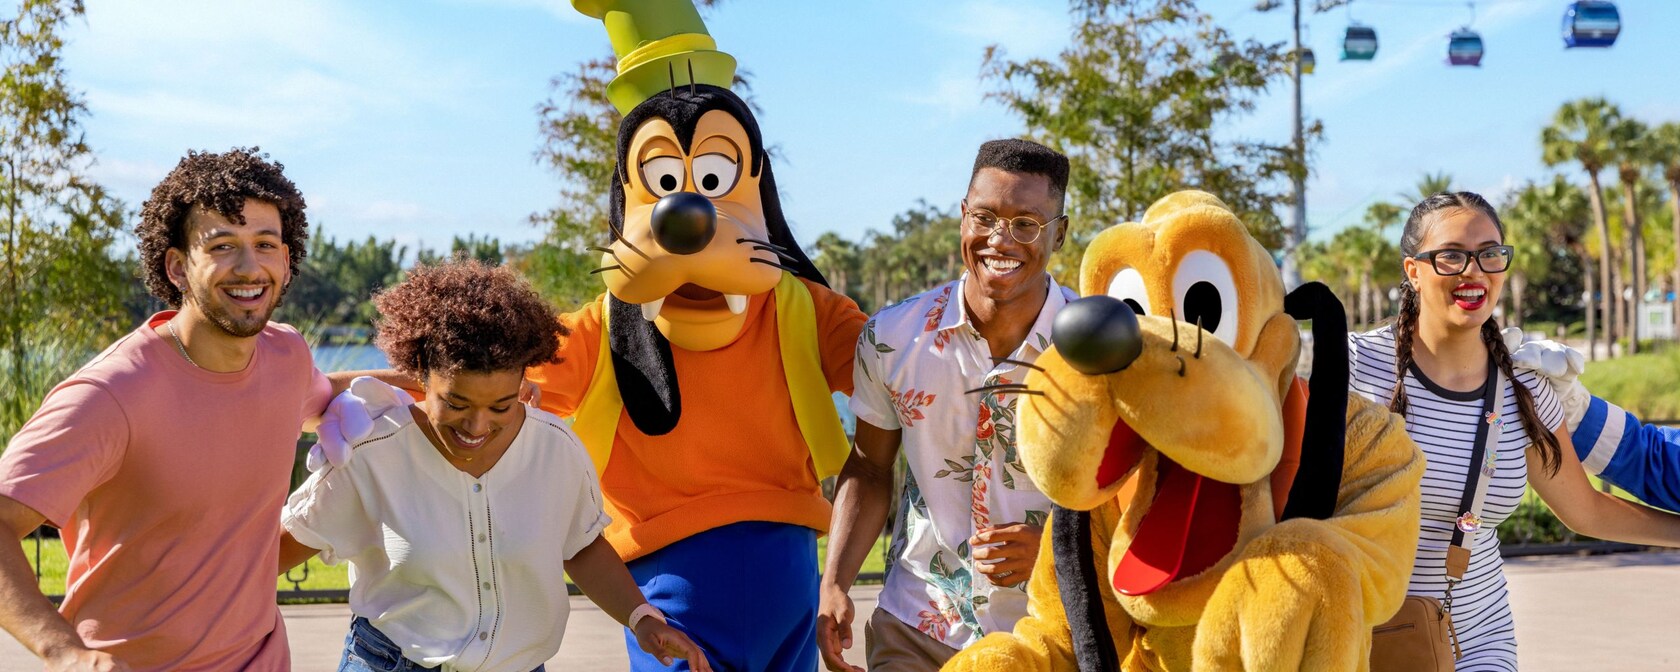 Guests smile and pose for a photo with Goofy and Pluto